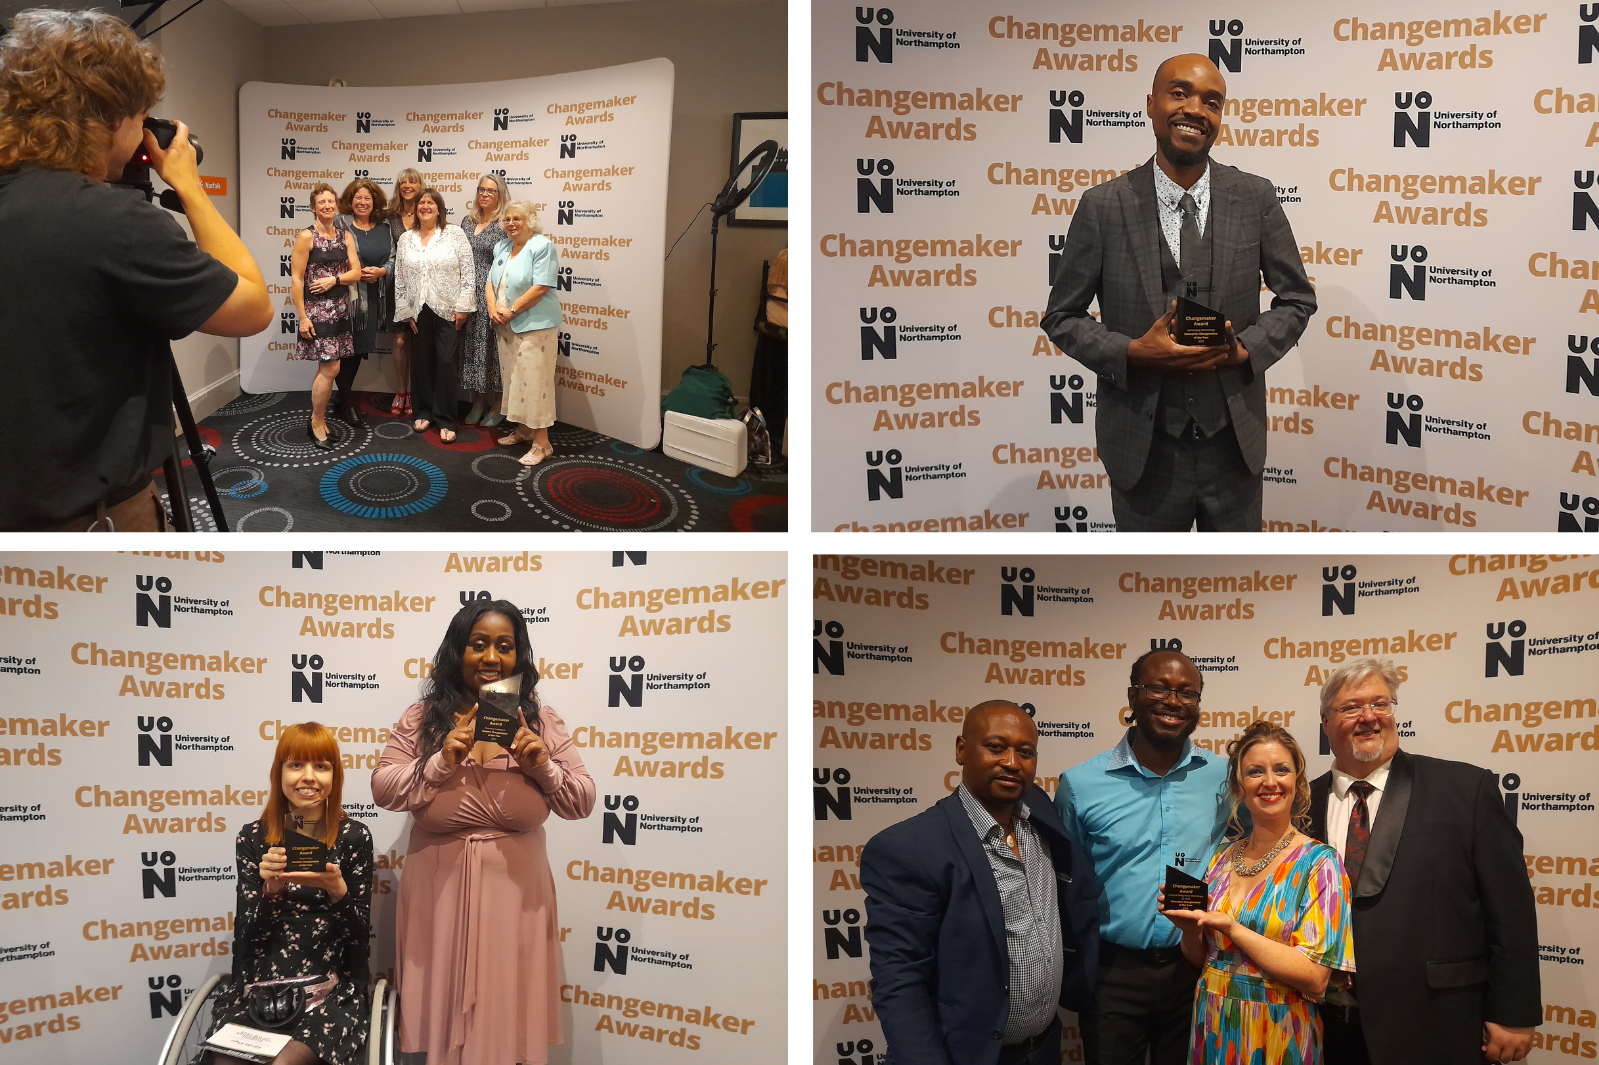 Four photos of the Changemaker Award winners holding their trophies